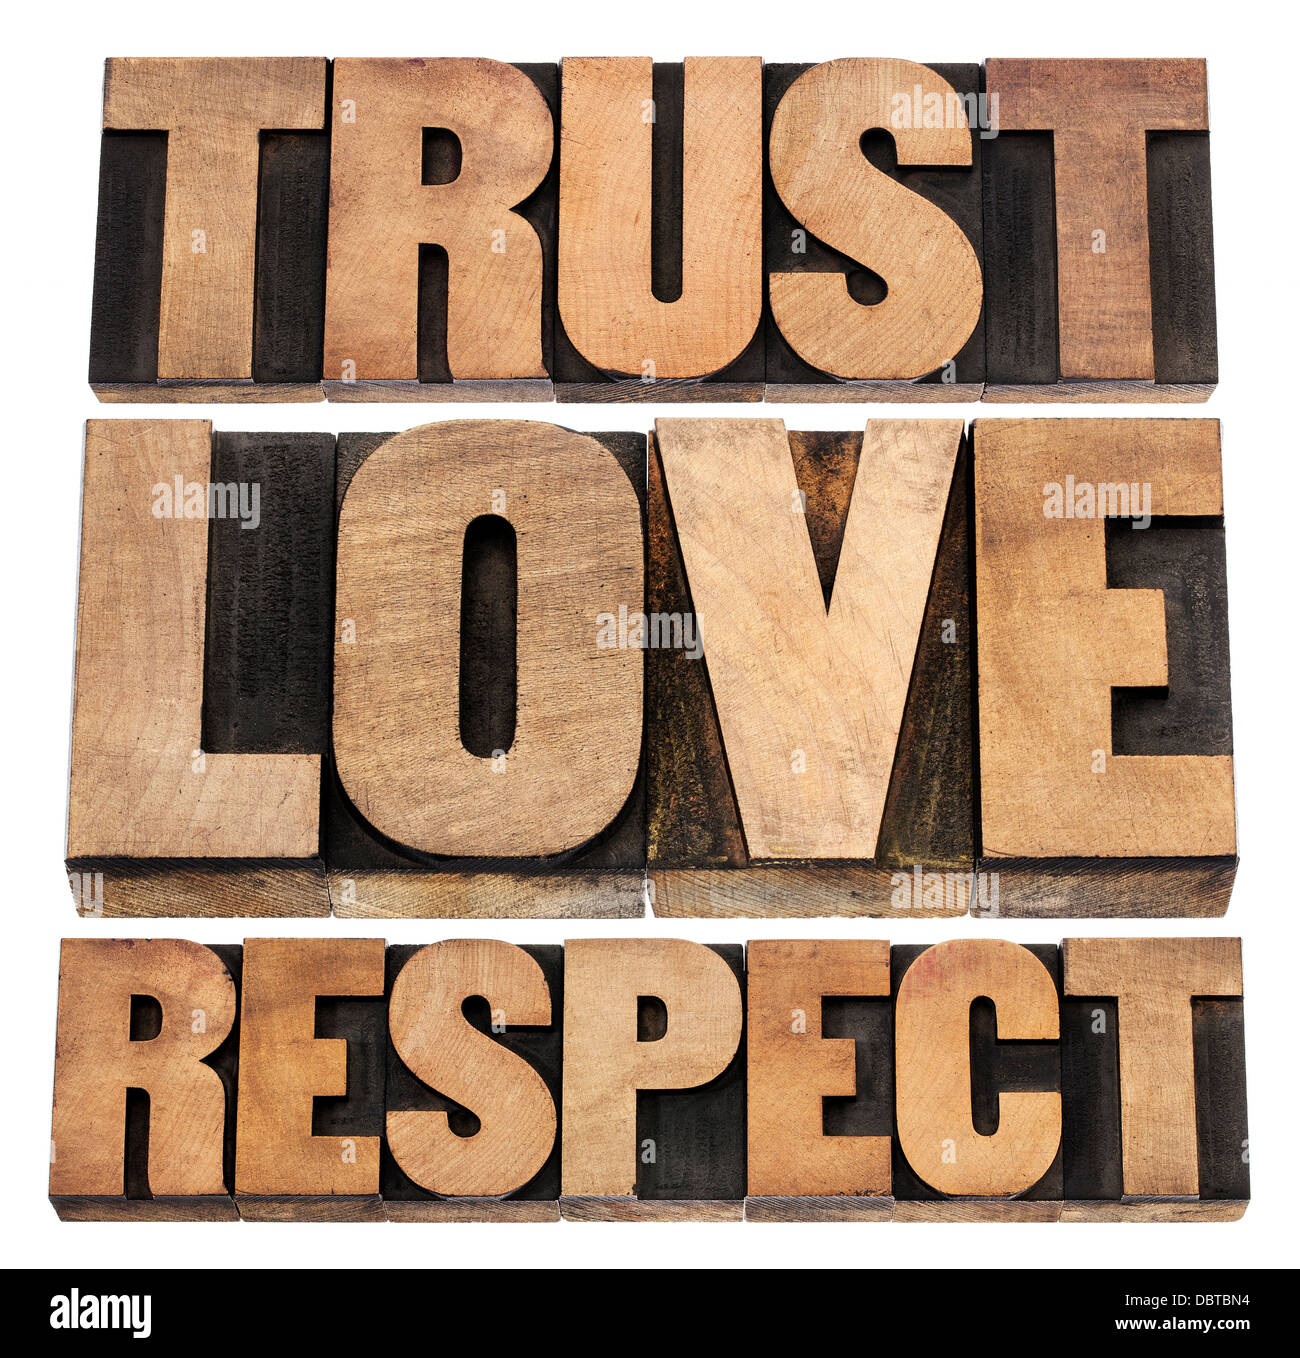 trust, love and respect word abstract - isolated text in vintage letterpress wood type Stock Photo